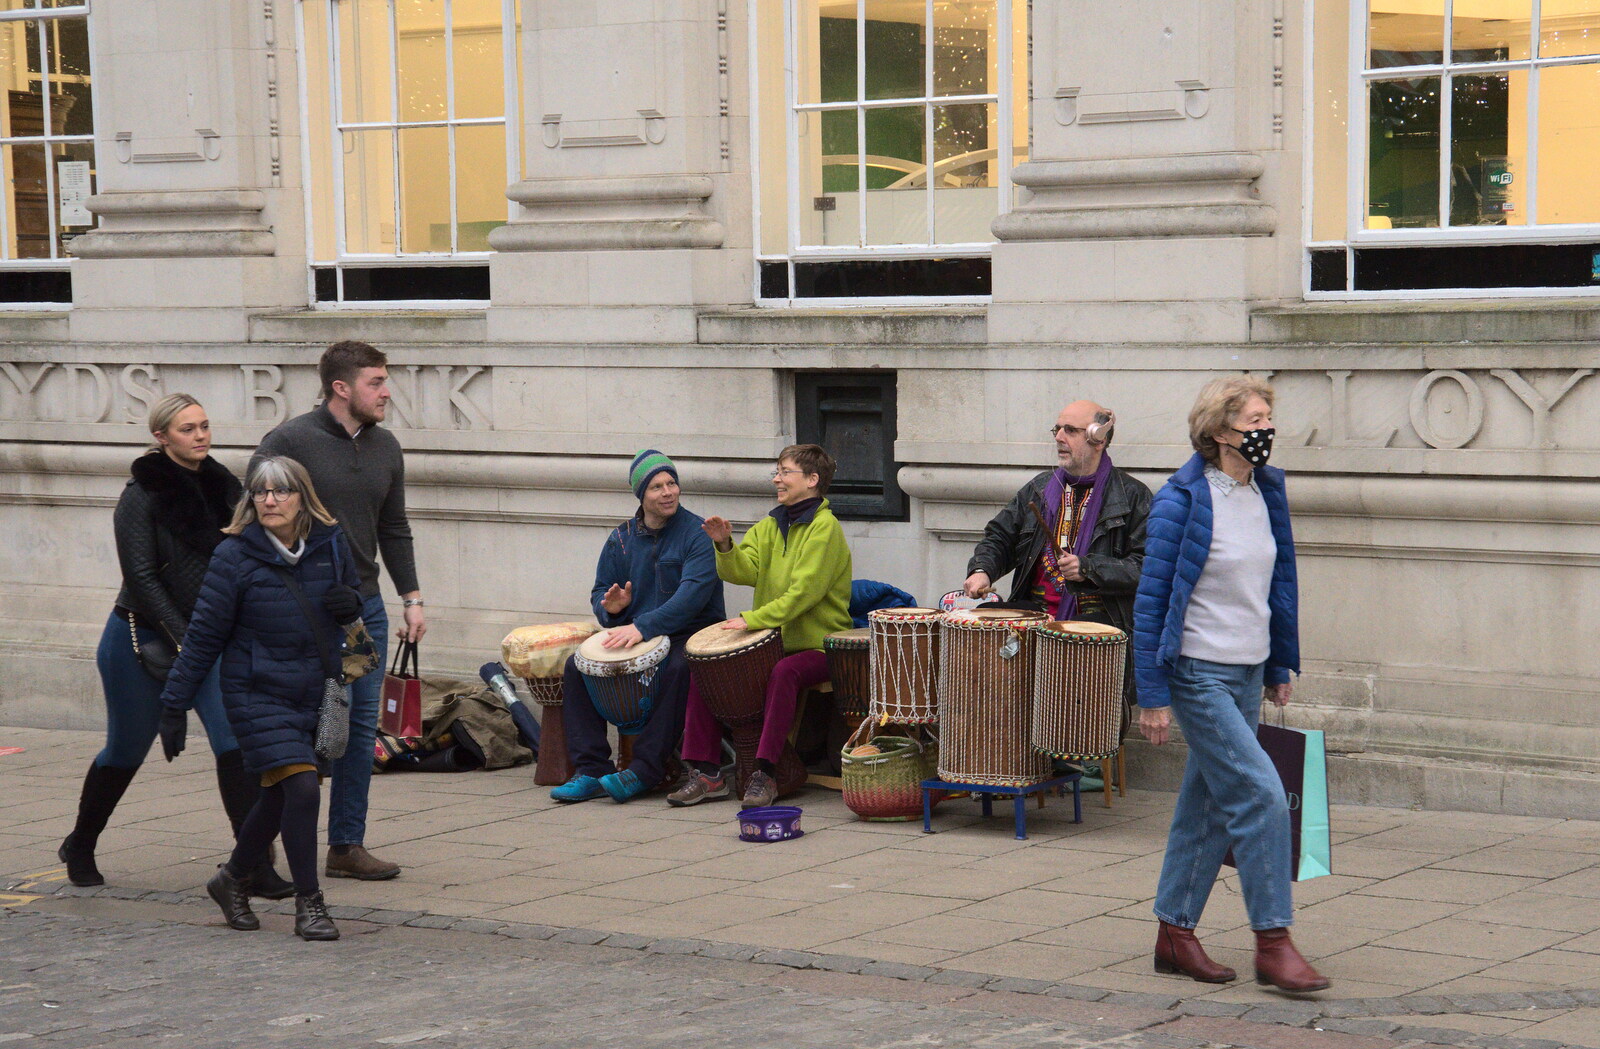 There's a drum group outside Lloyds Bank from Norwich Lights and a Village Hall Jumble Sale, Brome, Suffolk - 20th November 2021